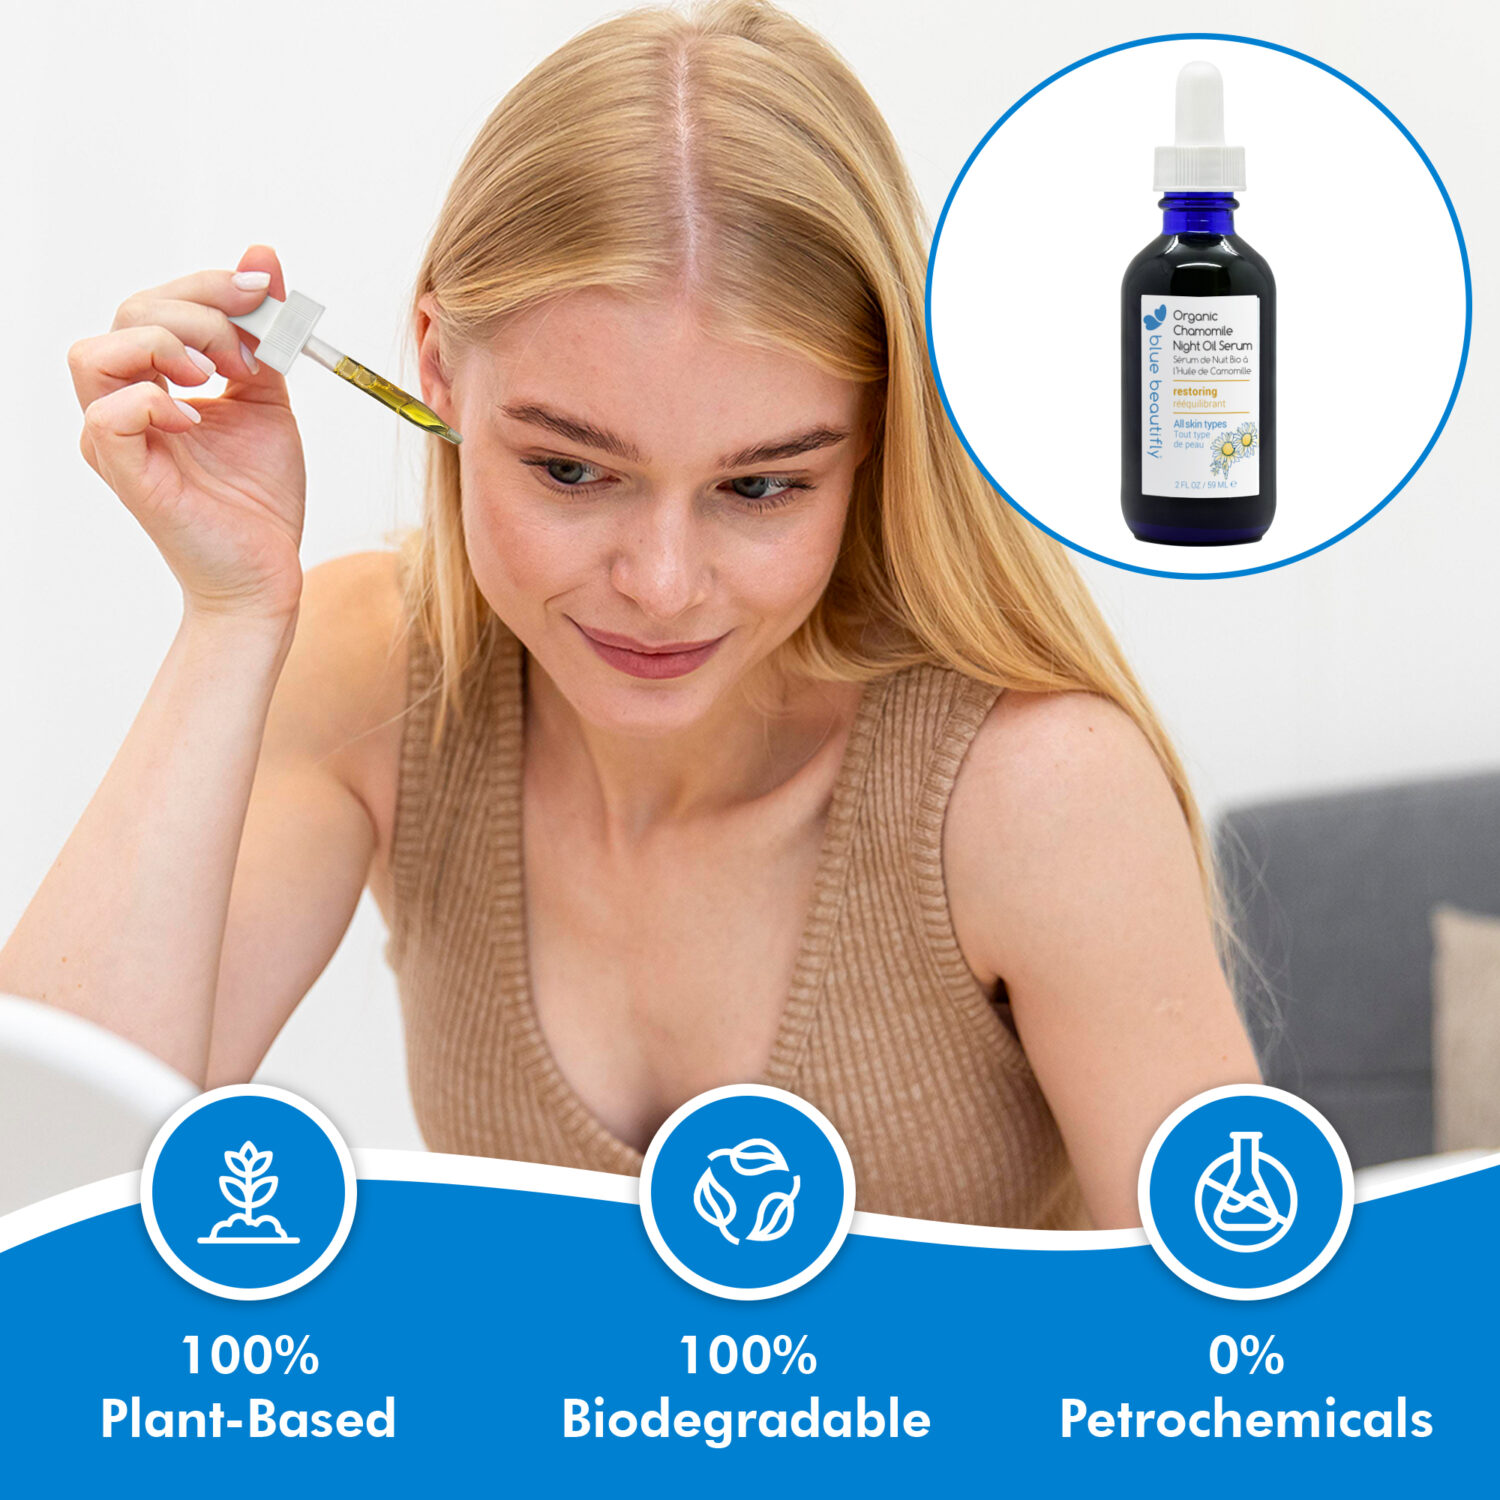 Blue Beautifly Organic Chamomile Night Oil Serum is 100% plant-based and biodegradable and contains no petrochemicals or toxins